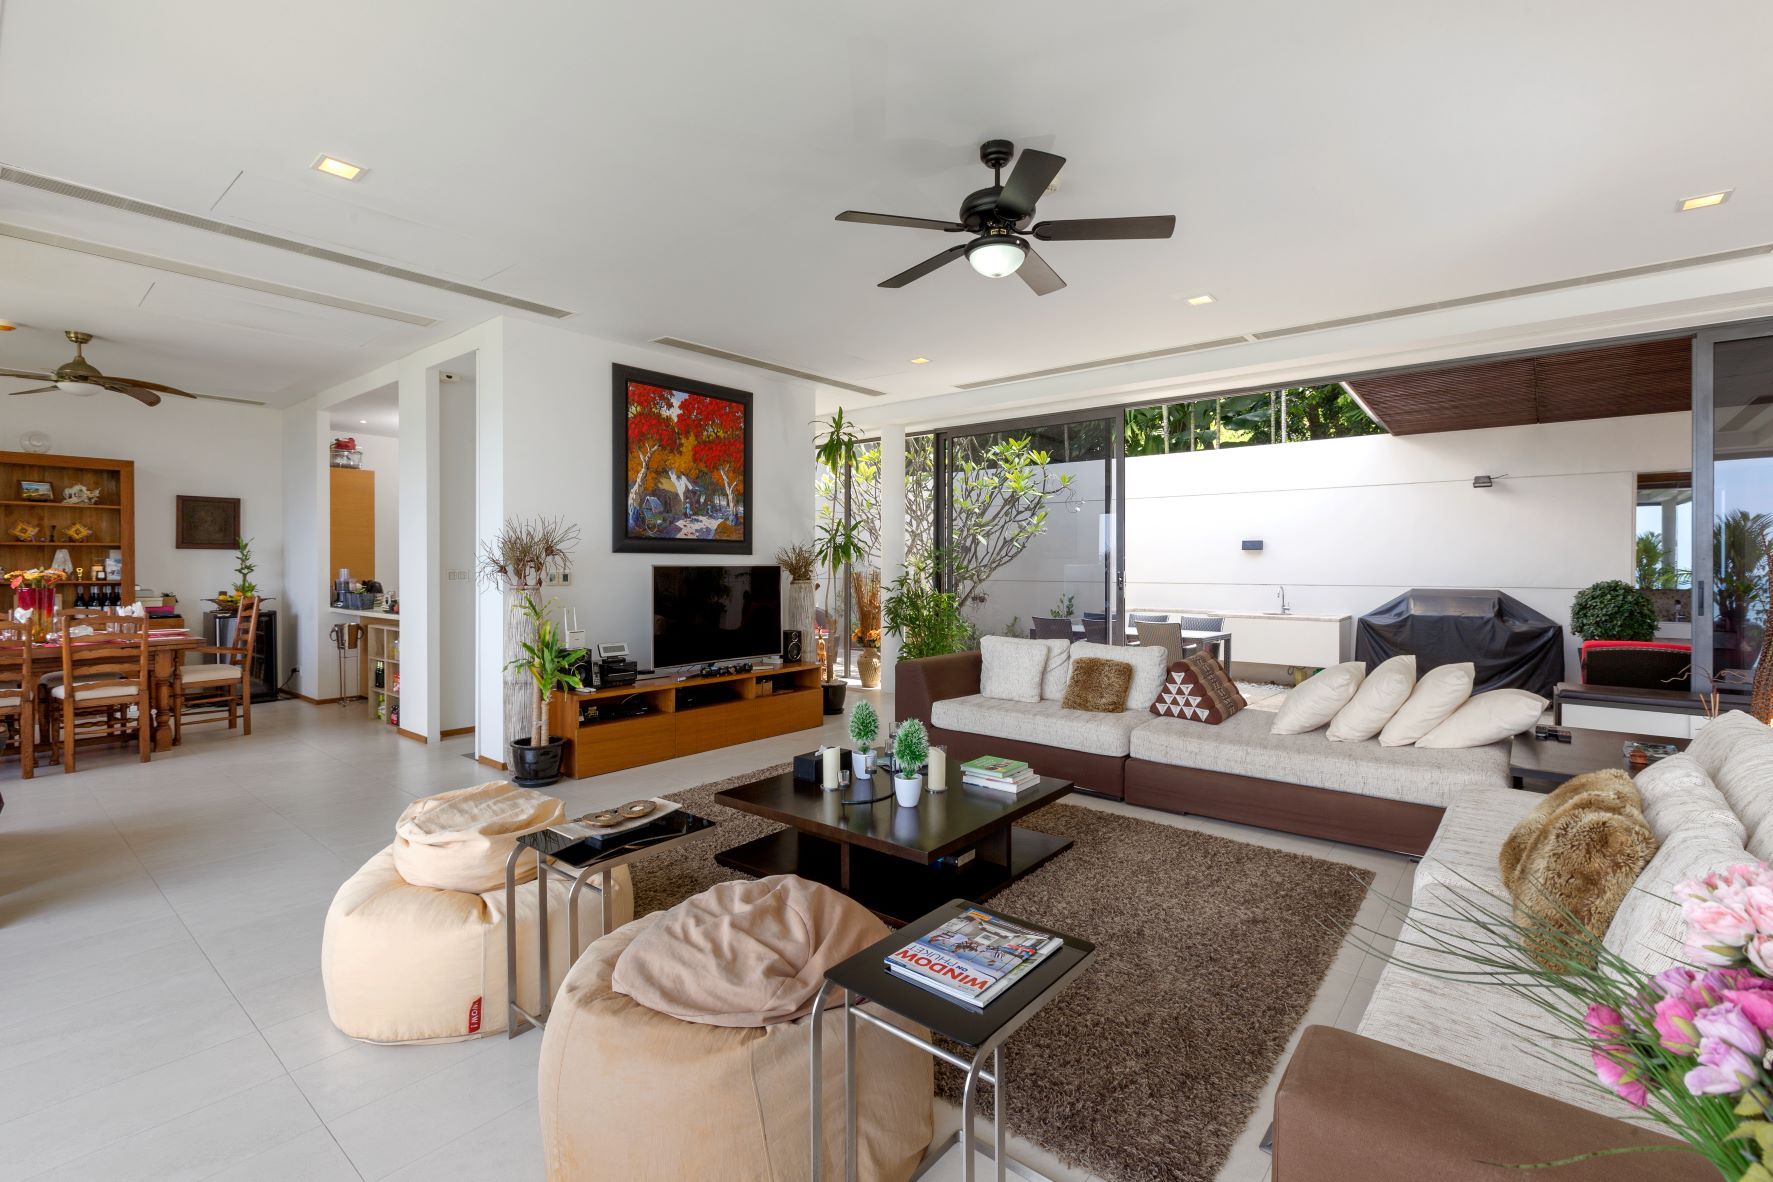 Rare property! Foreigner freehold ownership at The heights Kata, Phuket.